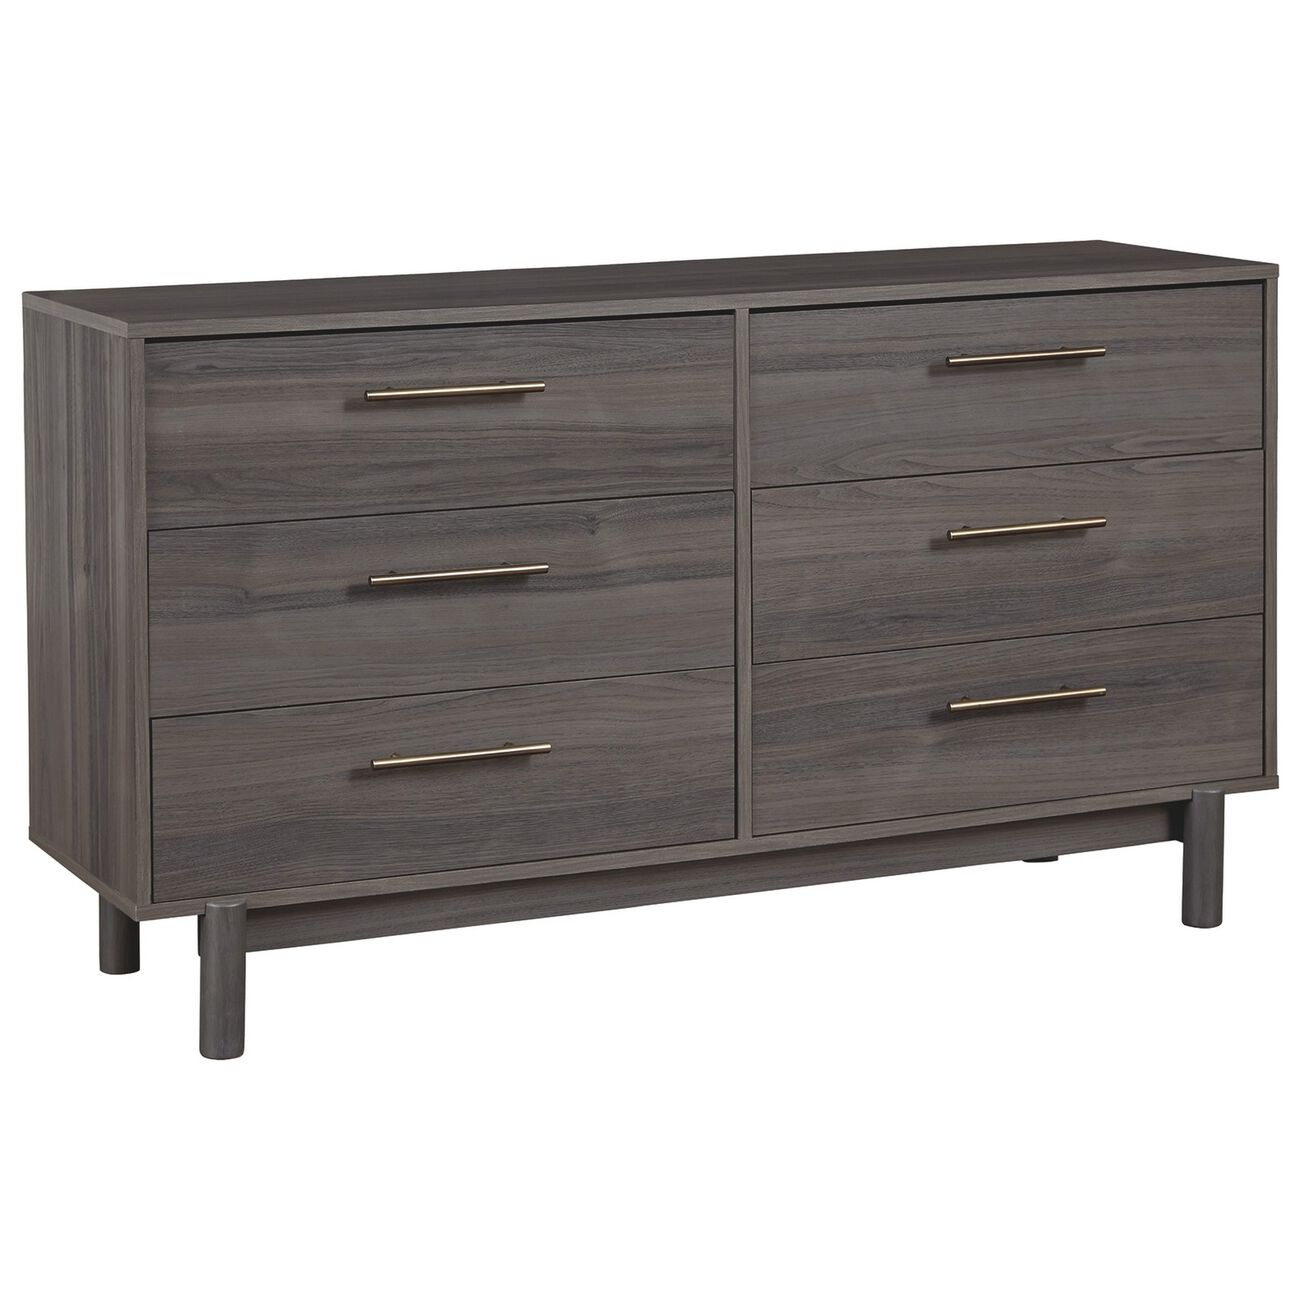 6 Drawer Contemporary Wooden Dresser with Metal Bar Handles, Gray